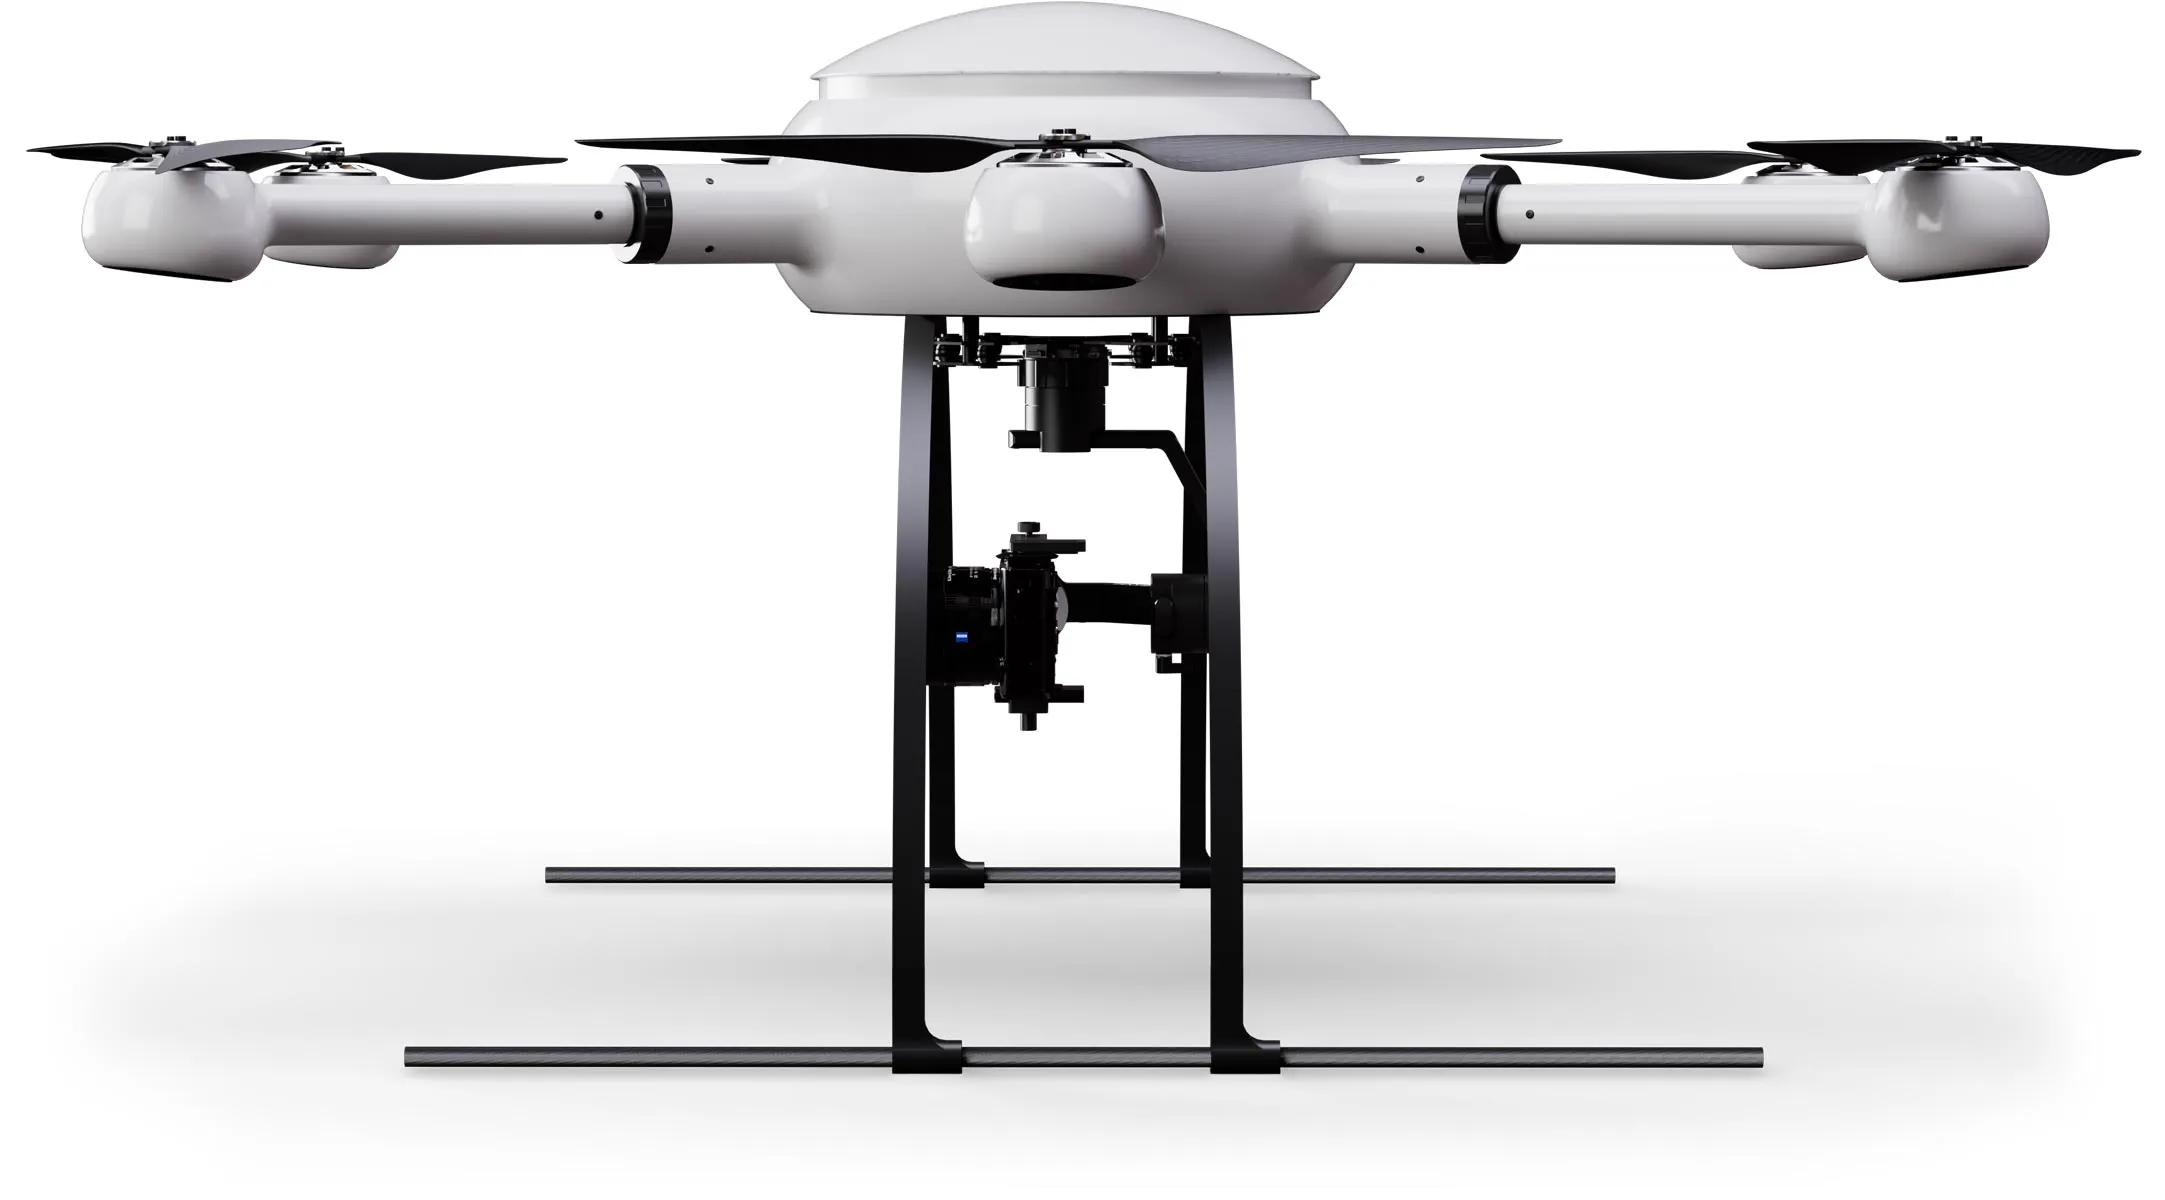 Exabotix Mercury LiDAR Industrial drone side view from left with LiDAR scanner for precise 3D scanning and surveying tasks.